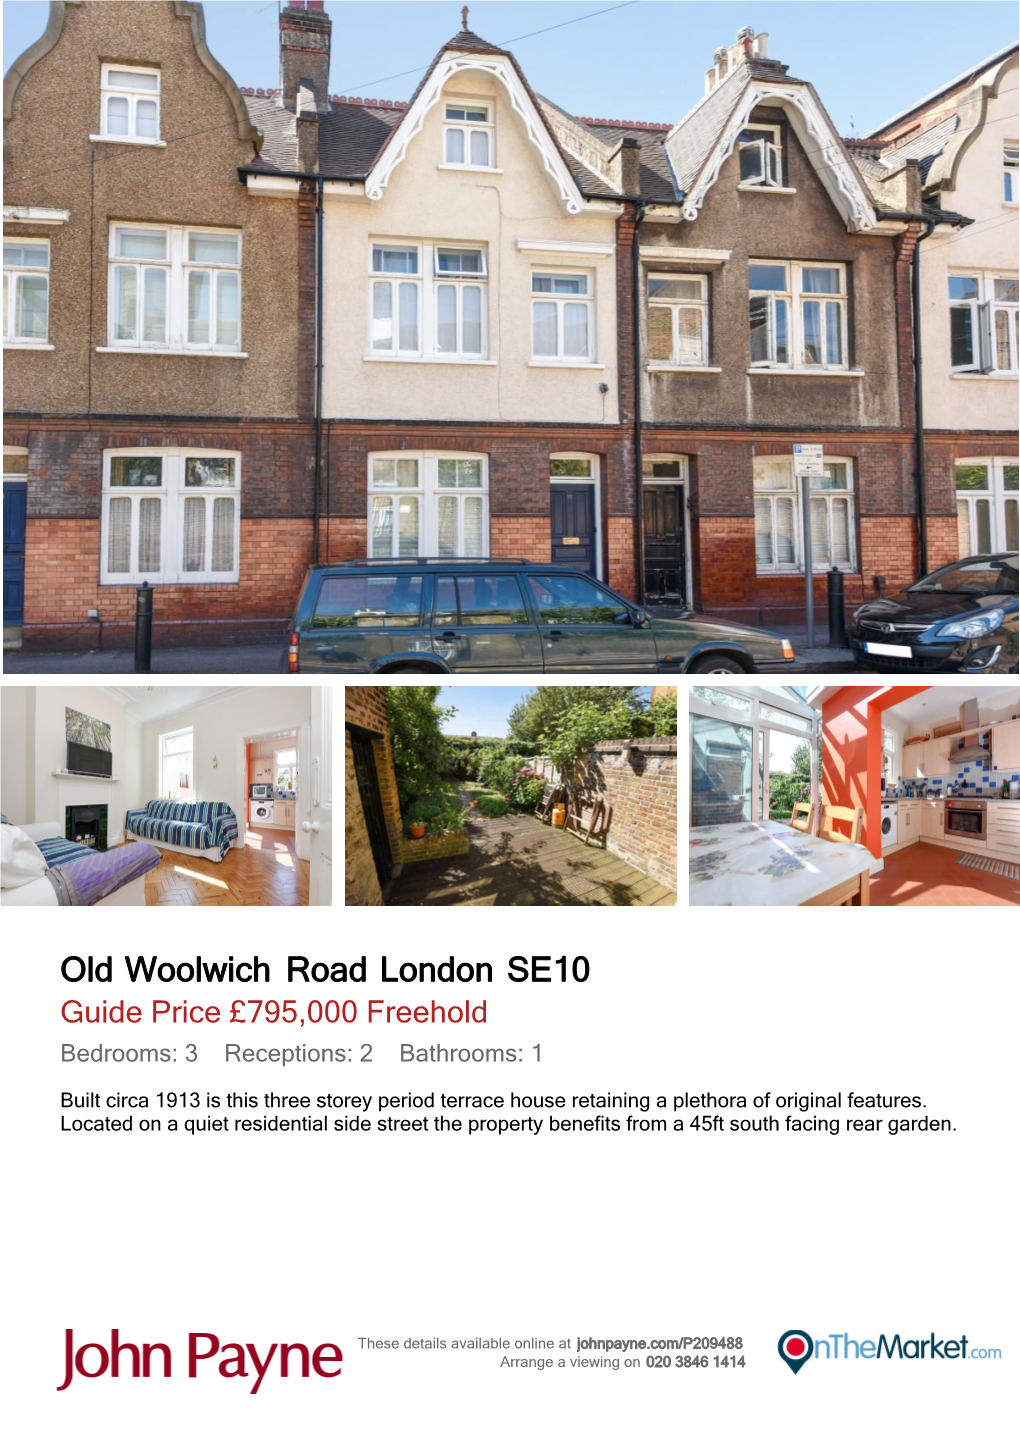 Old Woolwich Road London SE10 Guide Price £795,000 Freehold Bedrooms: 3 Receptions: 2 Bathrooms: 1